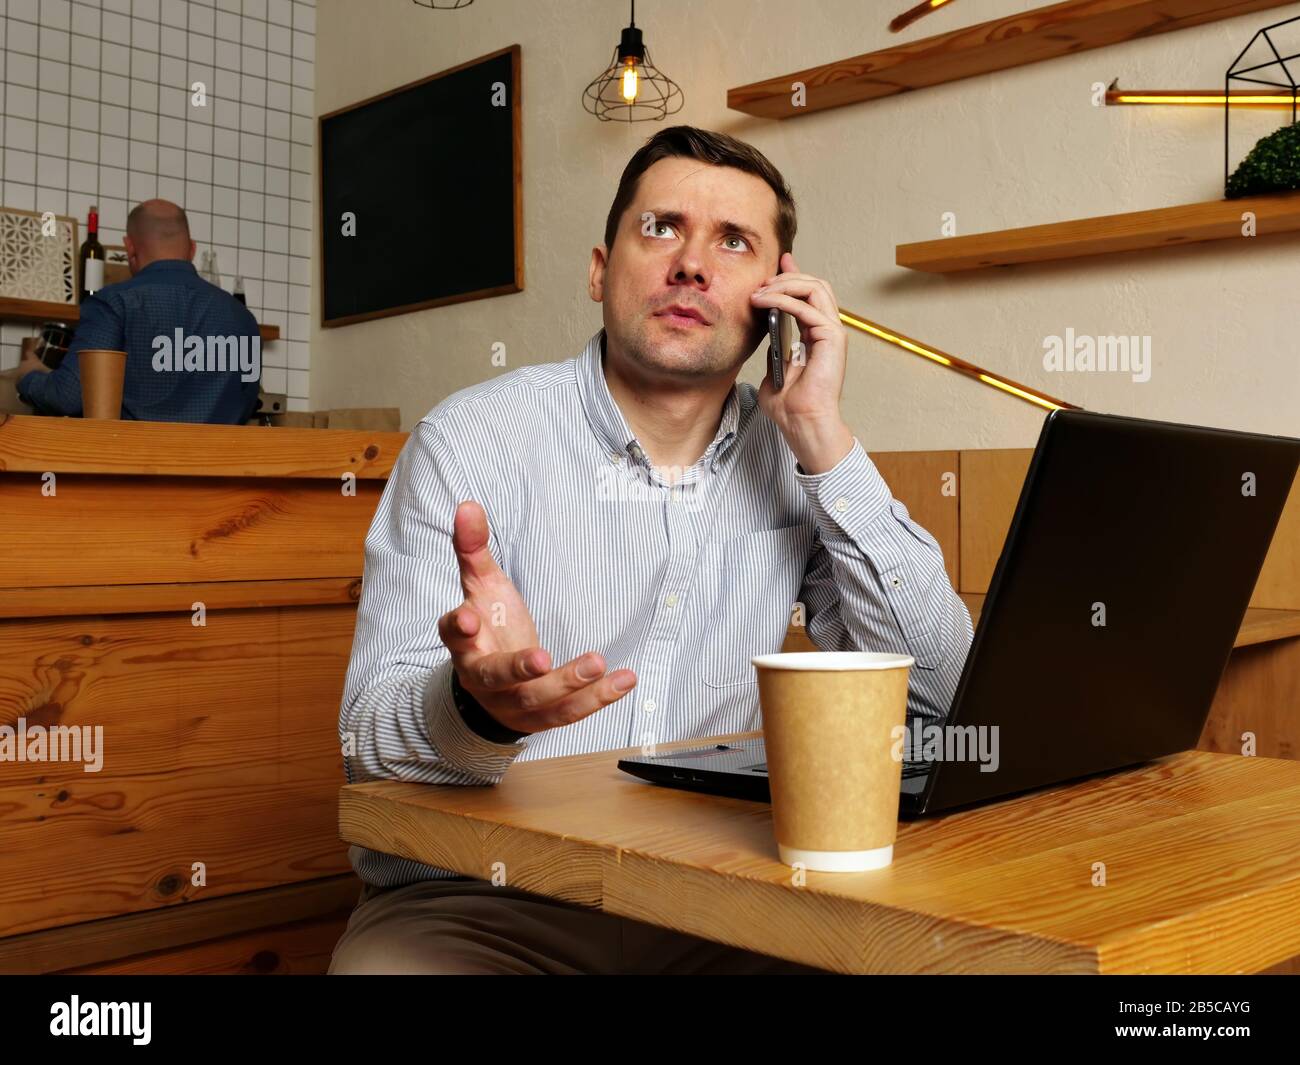 Confused and surprised man speaking on the phone in a cafe. Stock Photo